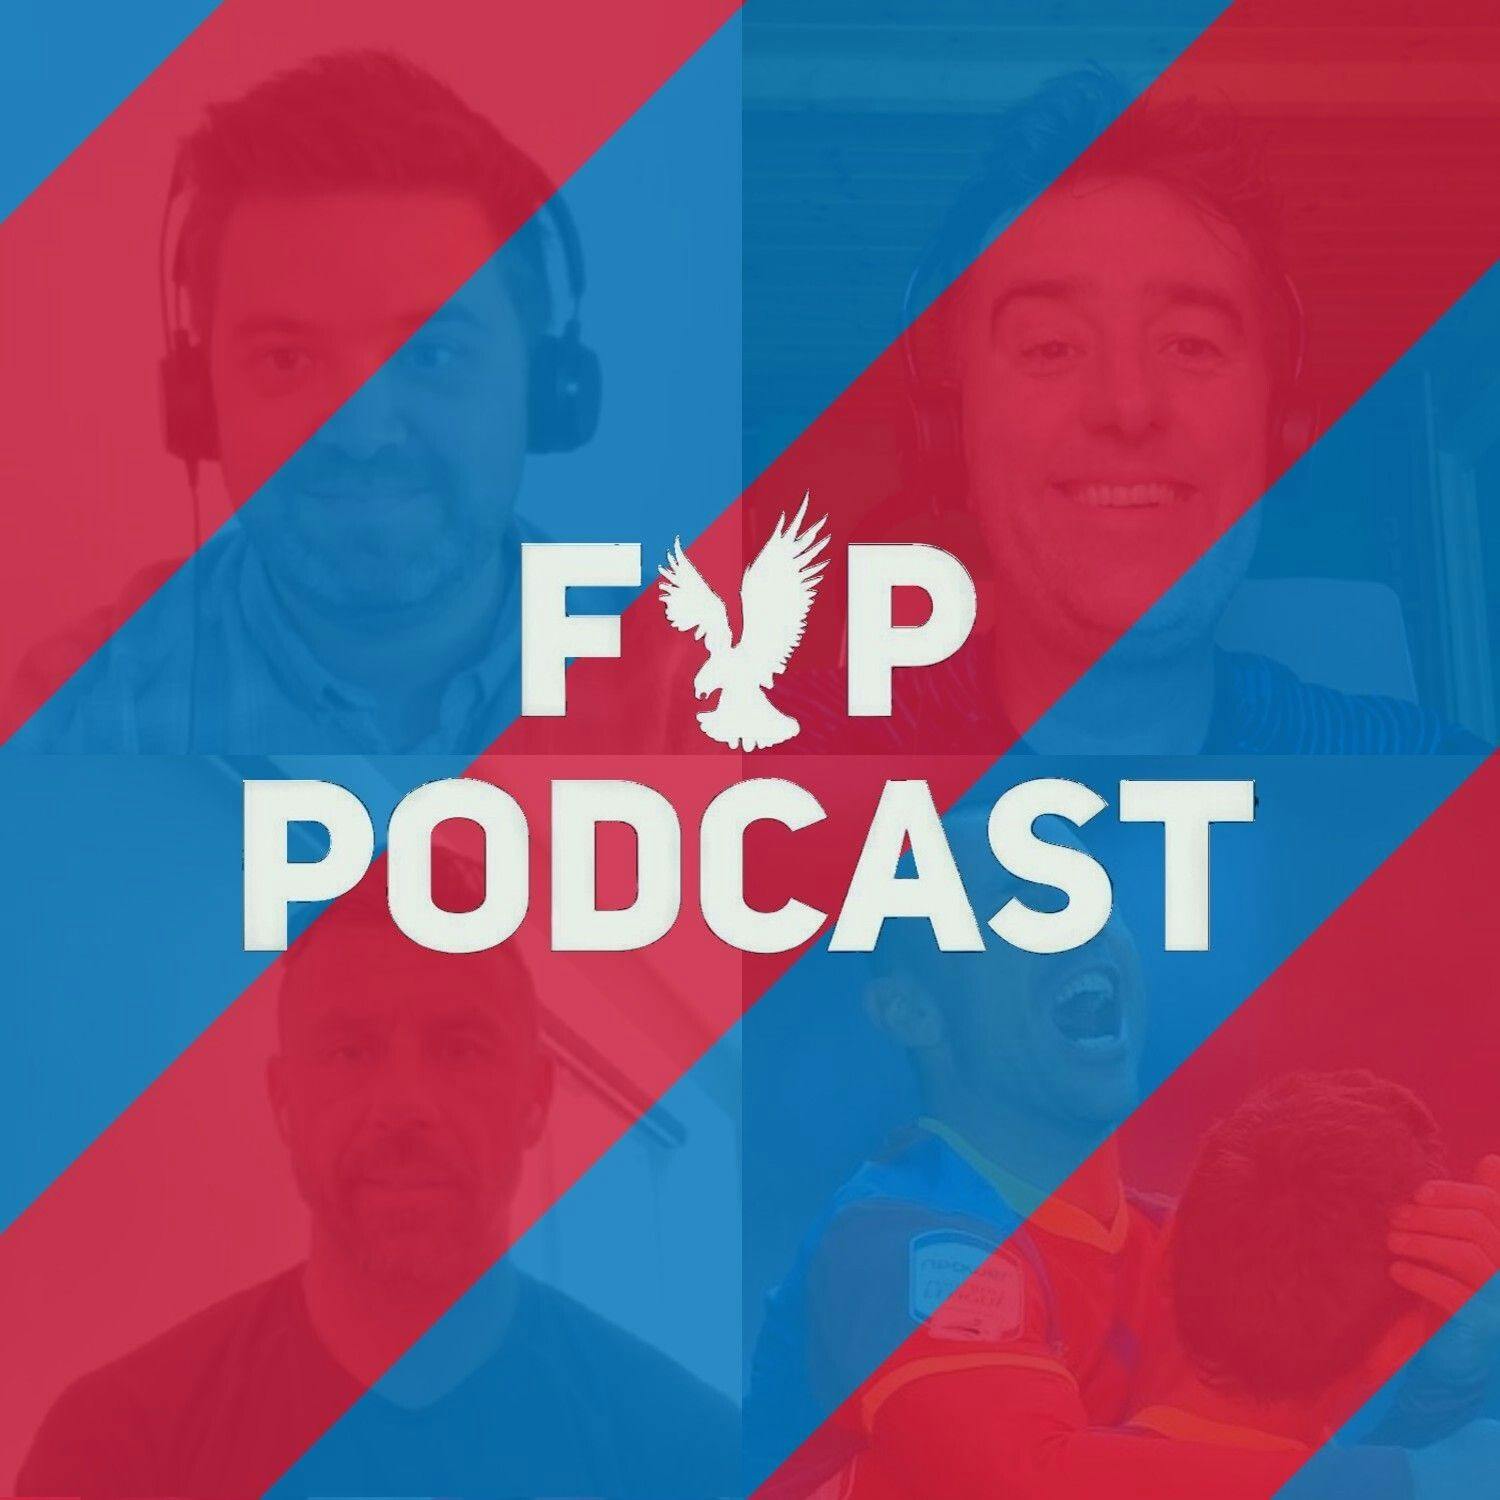 FYP Podcast 475 | KEVIN PHILLIPS ON WEMBLEY 10TH ANNIVERSARY